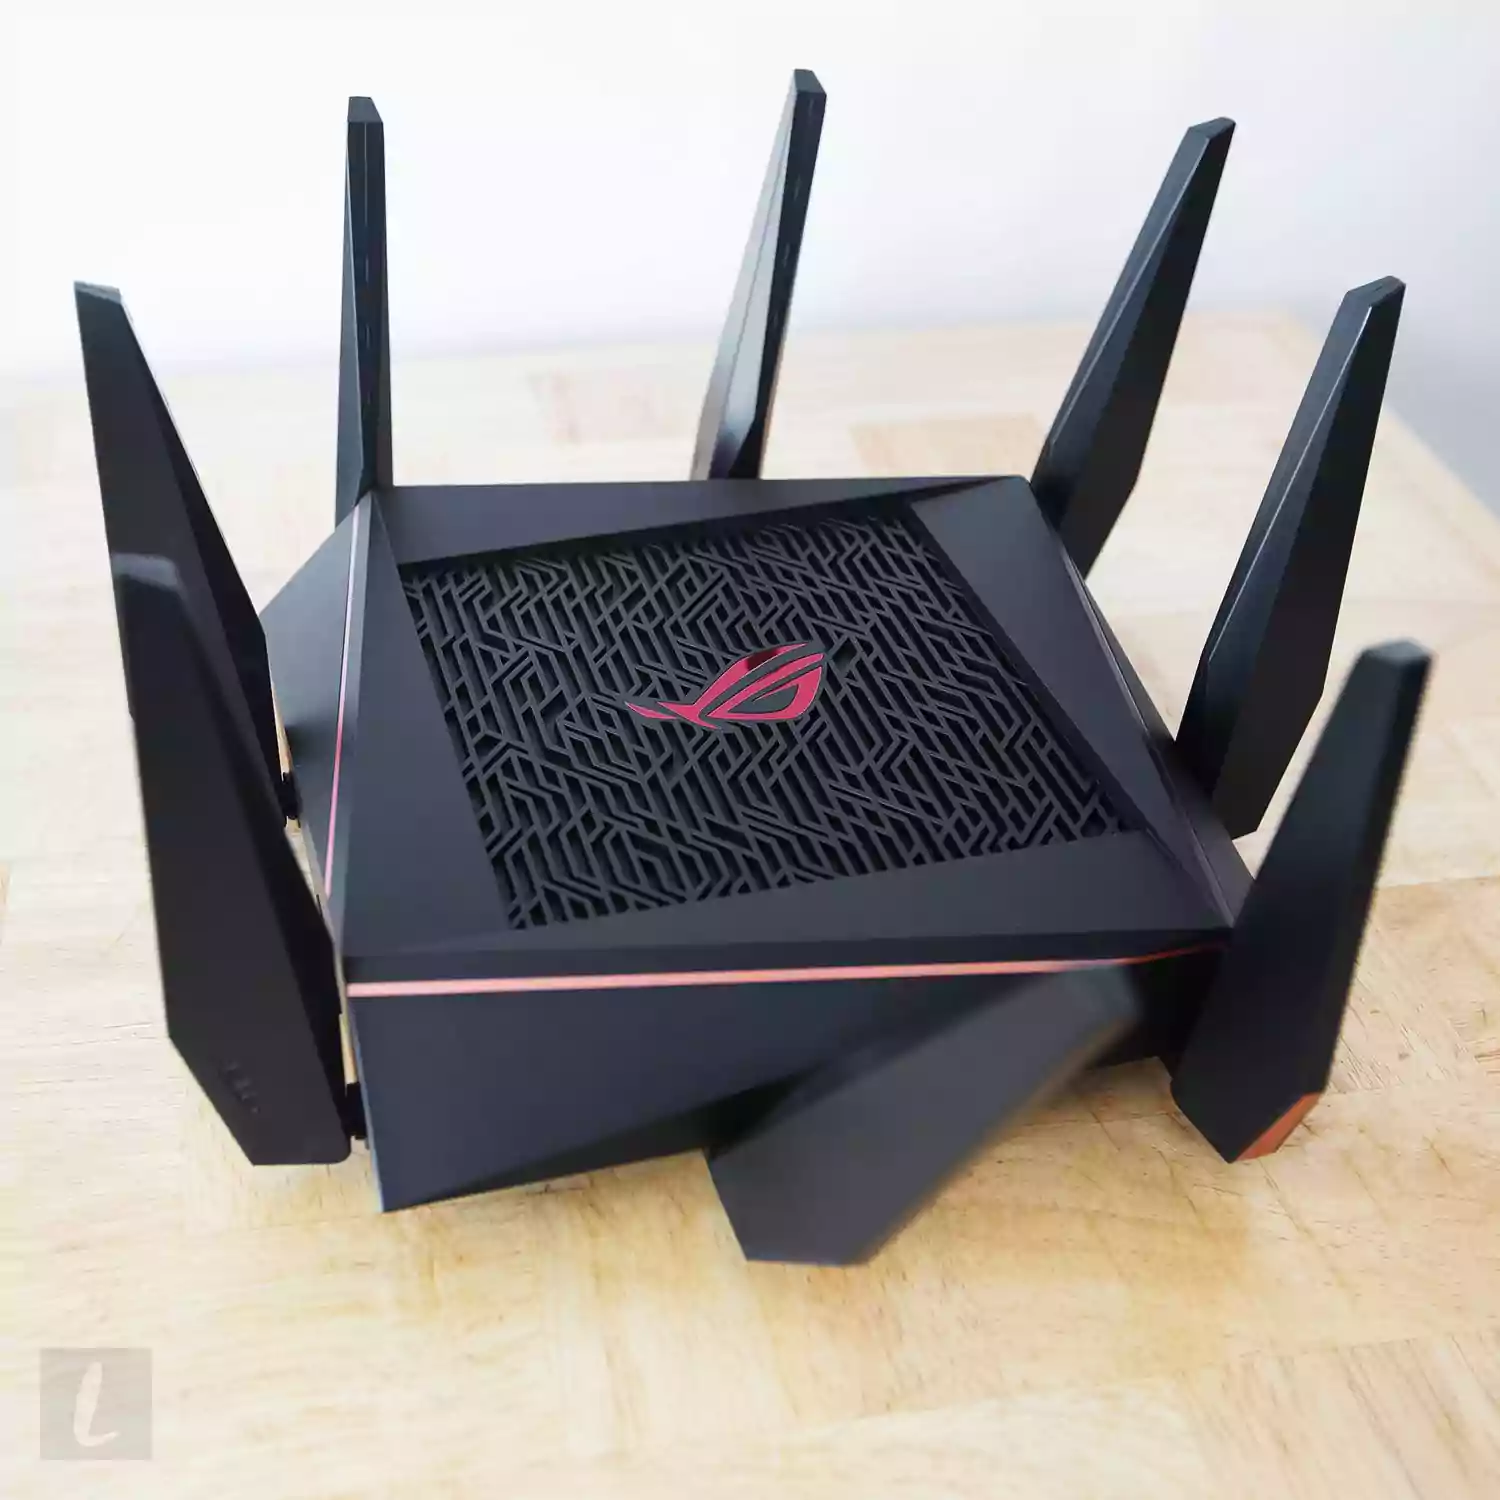 Top 3 best gaming routers in 2020